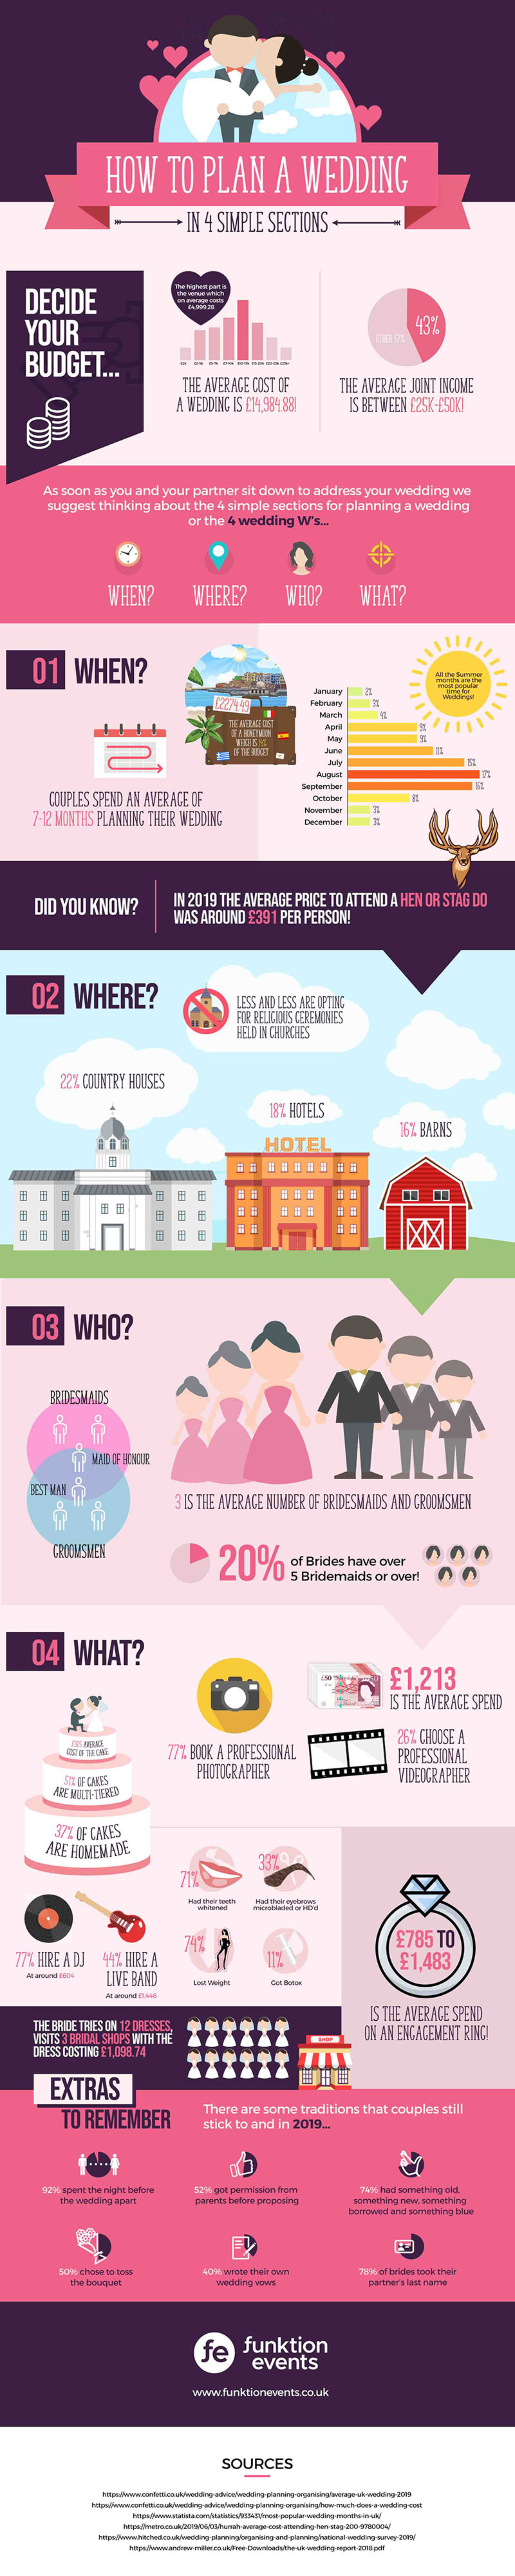 How to Plan a Wedding in 4 Simple Sections - Infographic